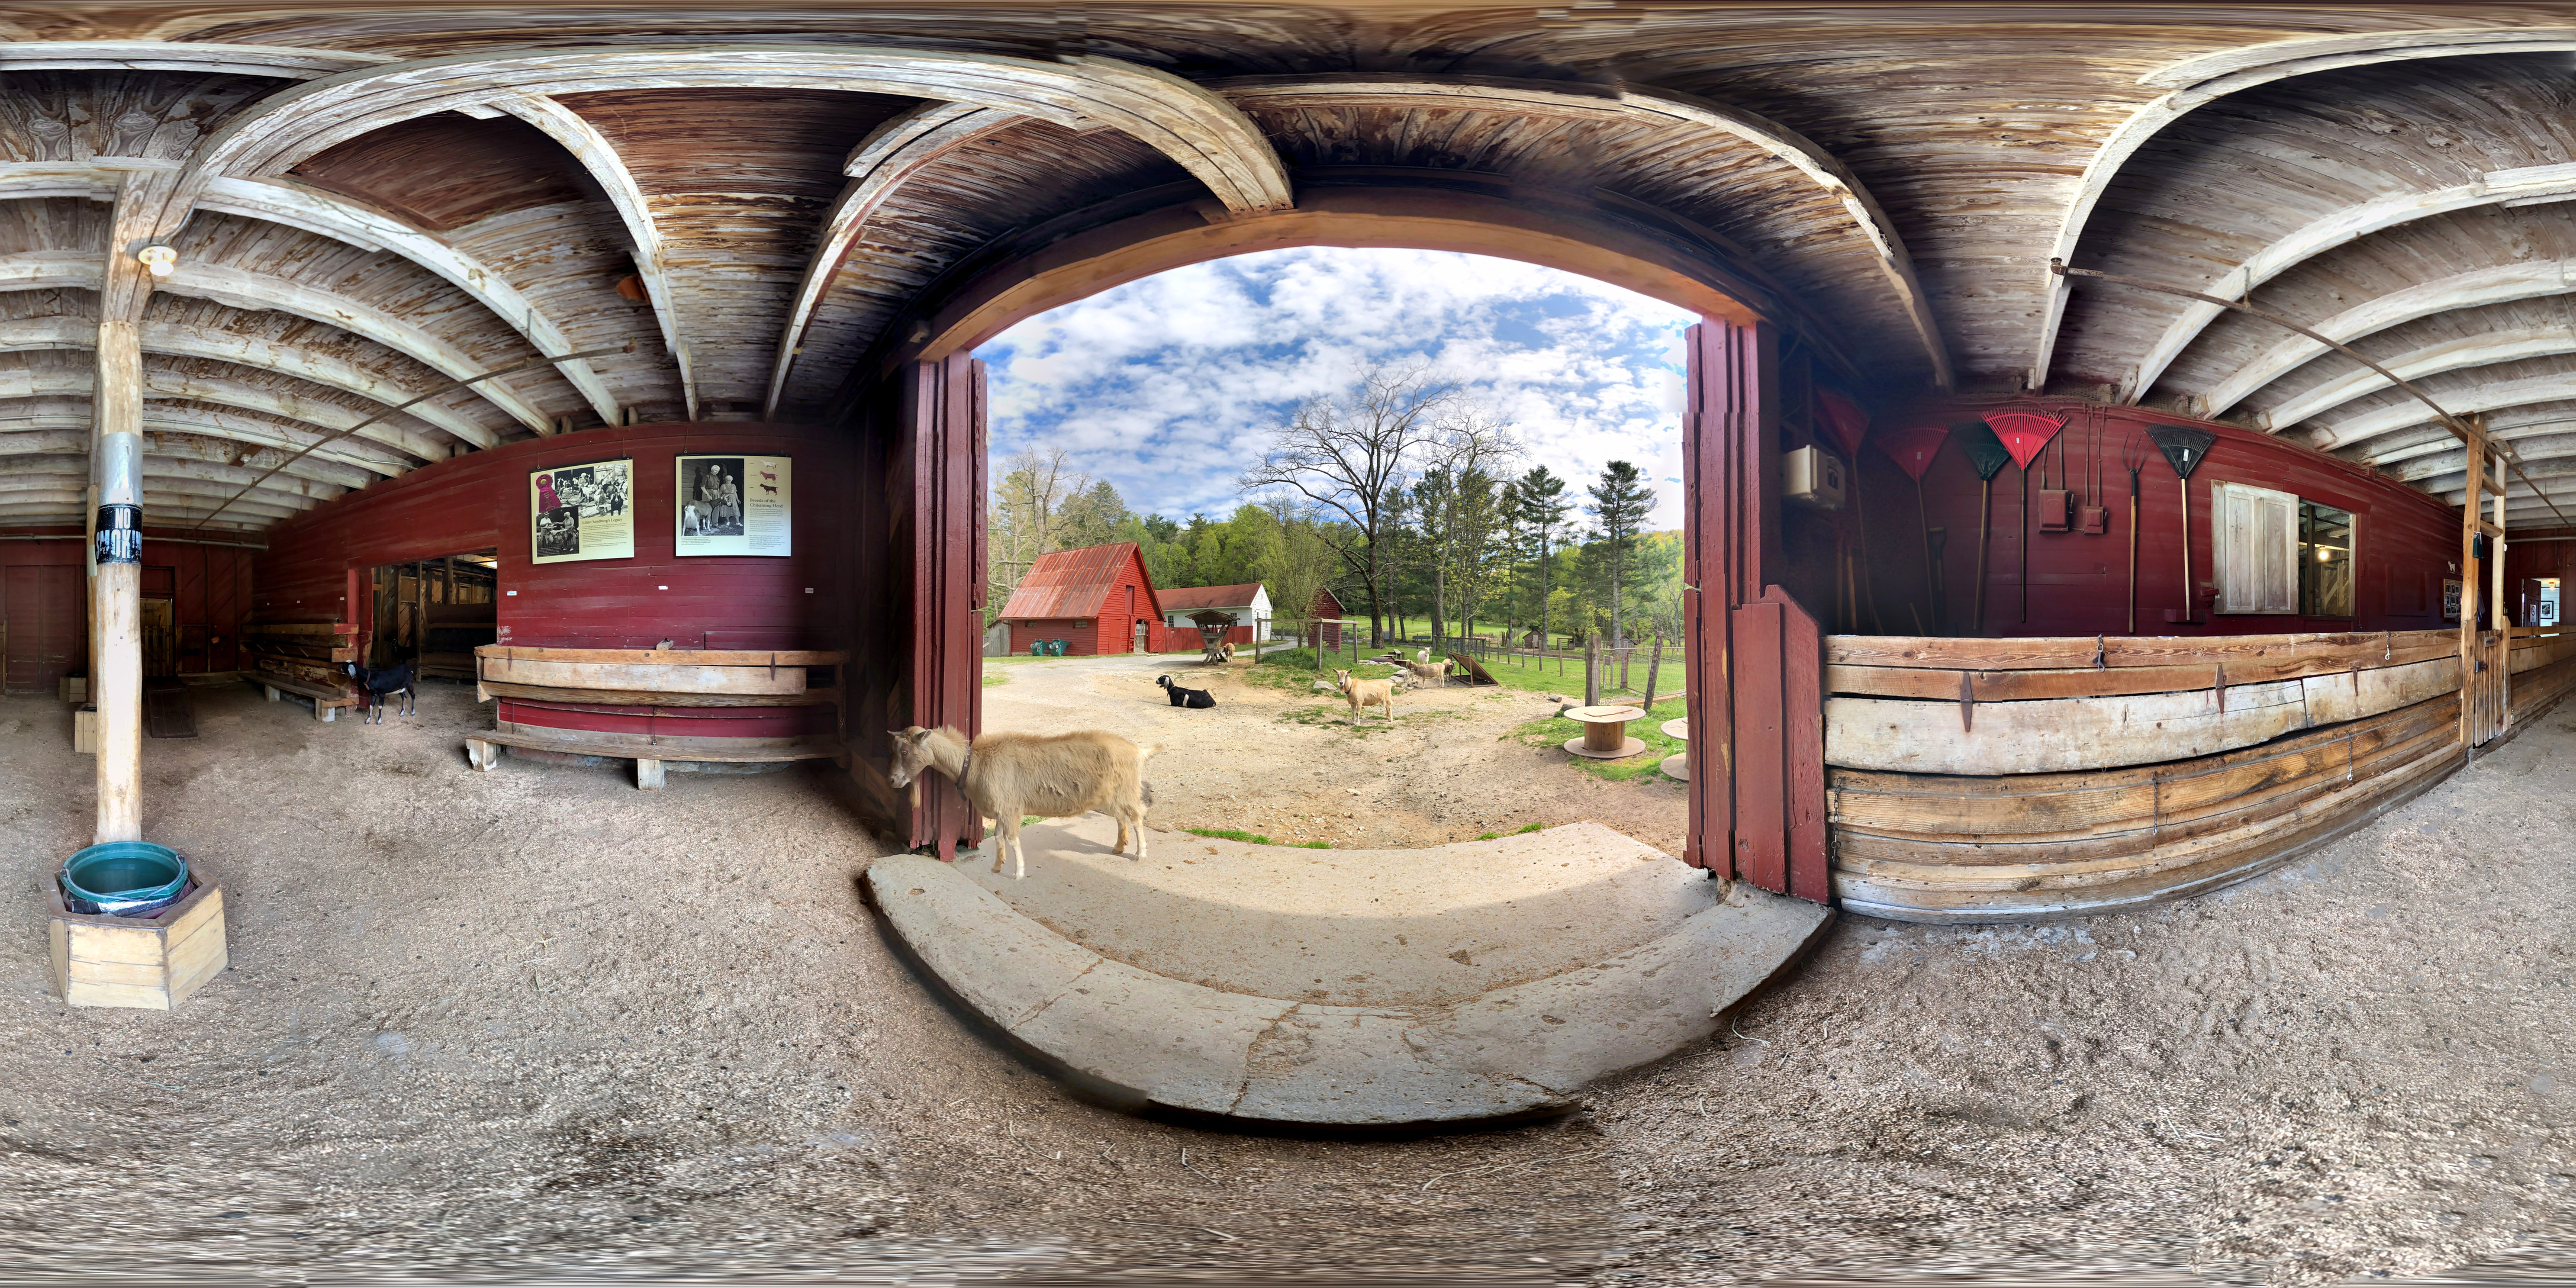 View from the entrance of the goat barn at Connemara Farms.